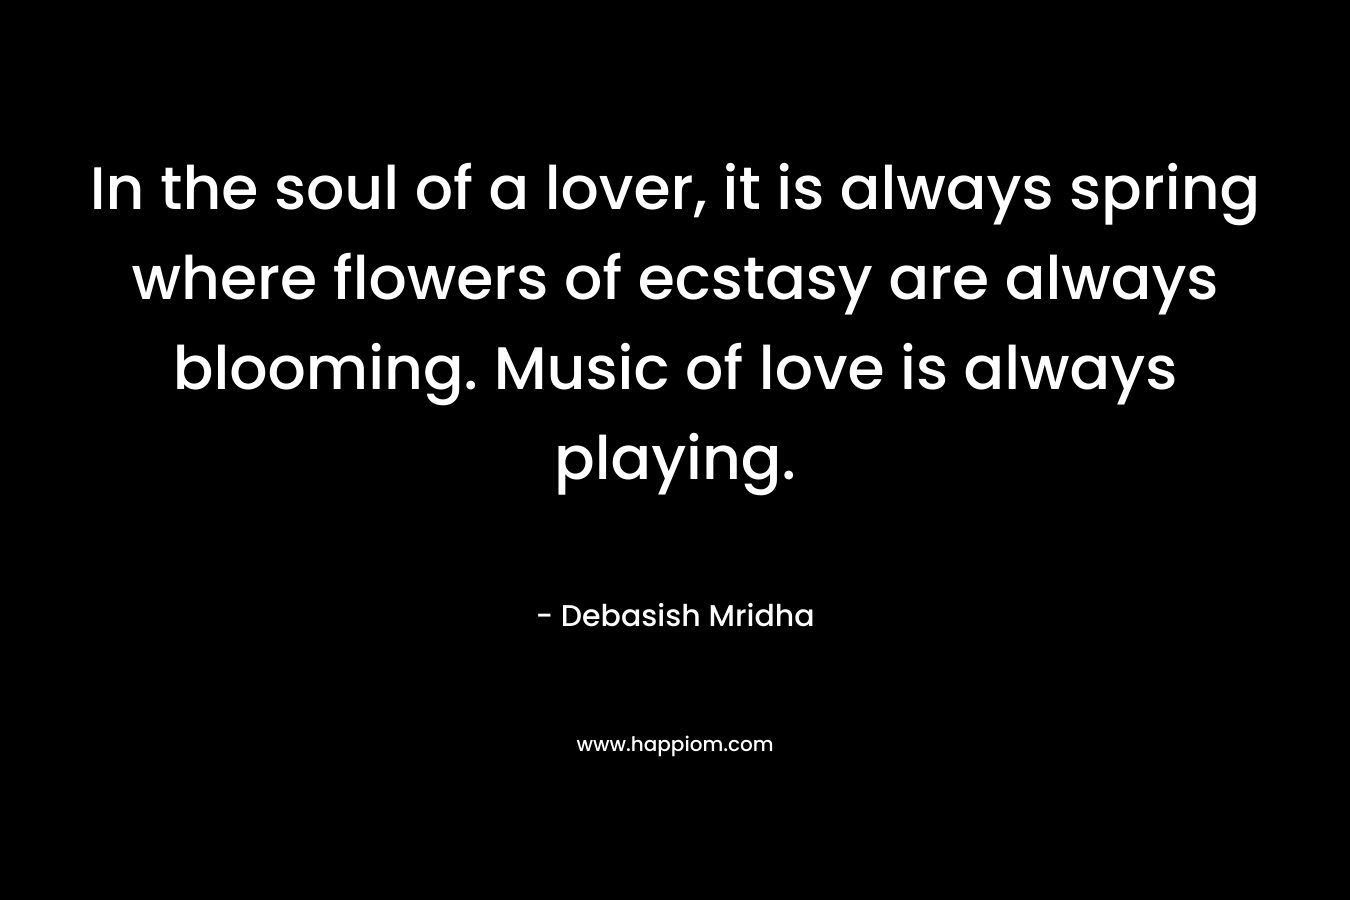 In the soul of a lover, it is always spring where flowers of ecstasy are always blooming. Music of love is always playing. – Debasish Mridha